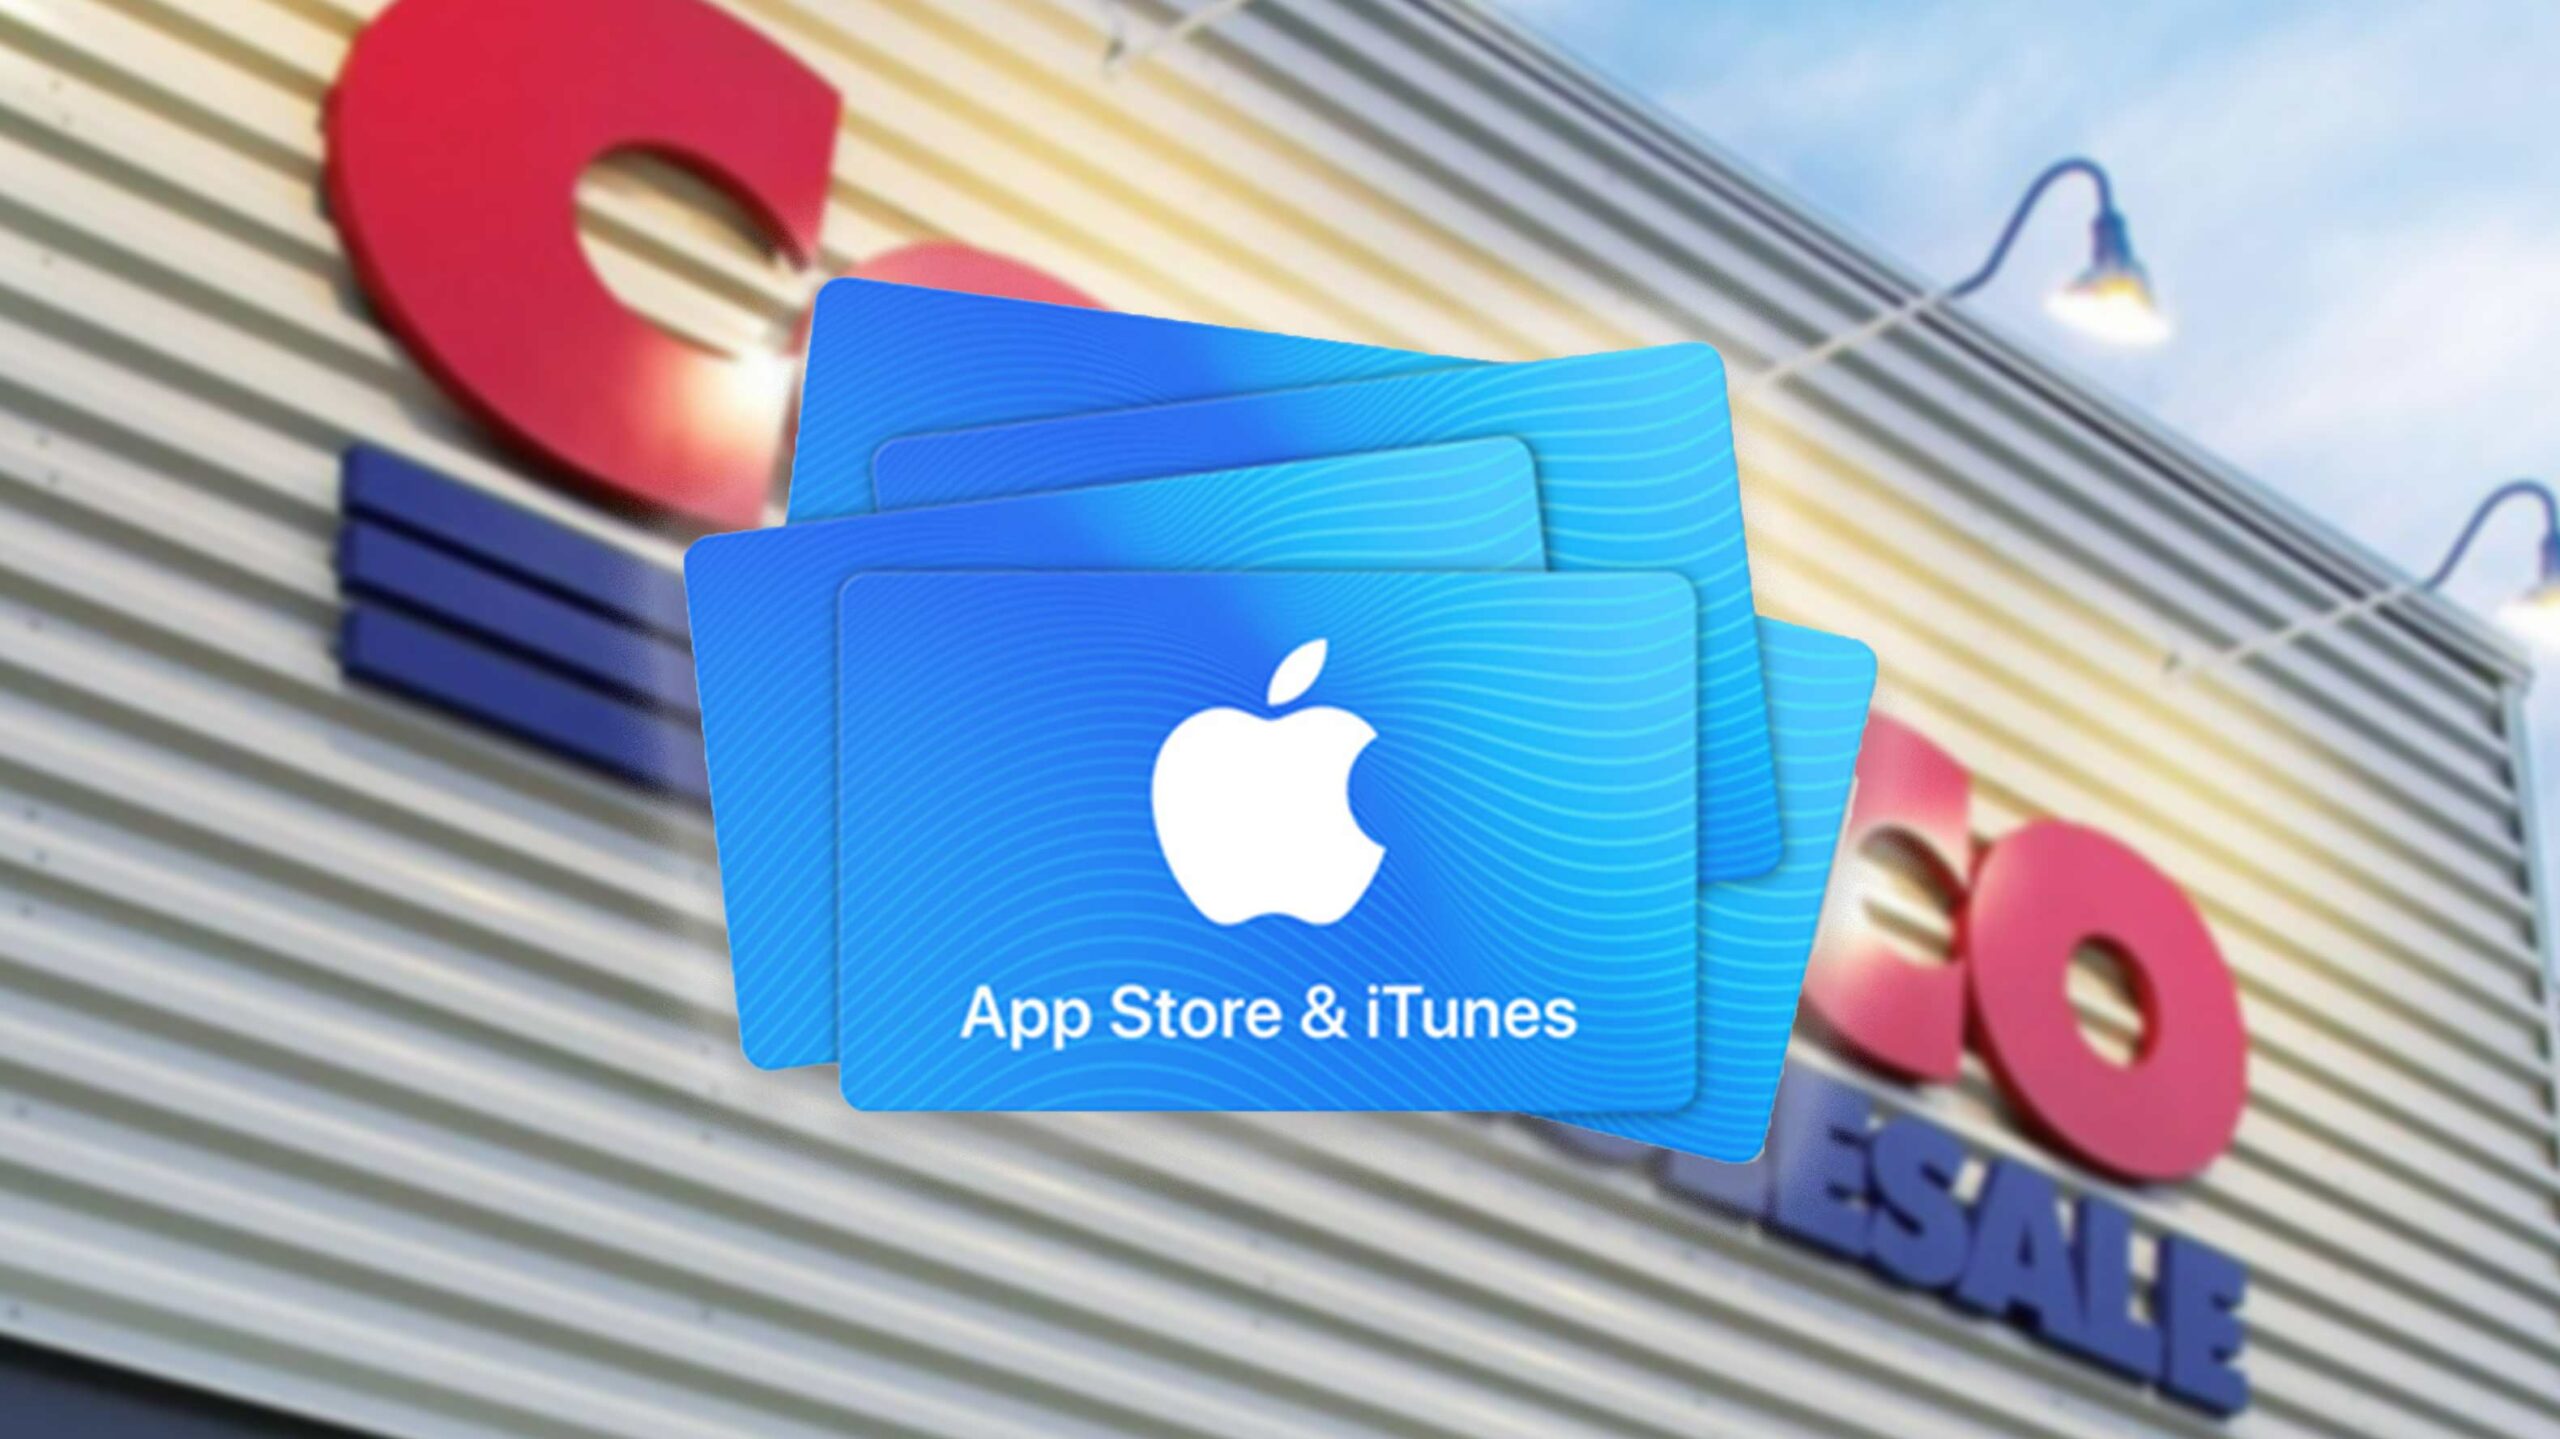 Apple Gift Cards Are Now Available in Canada